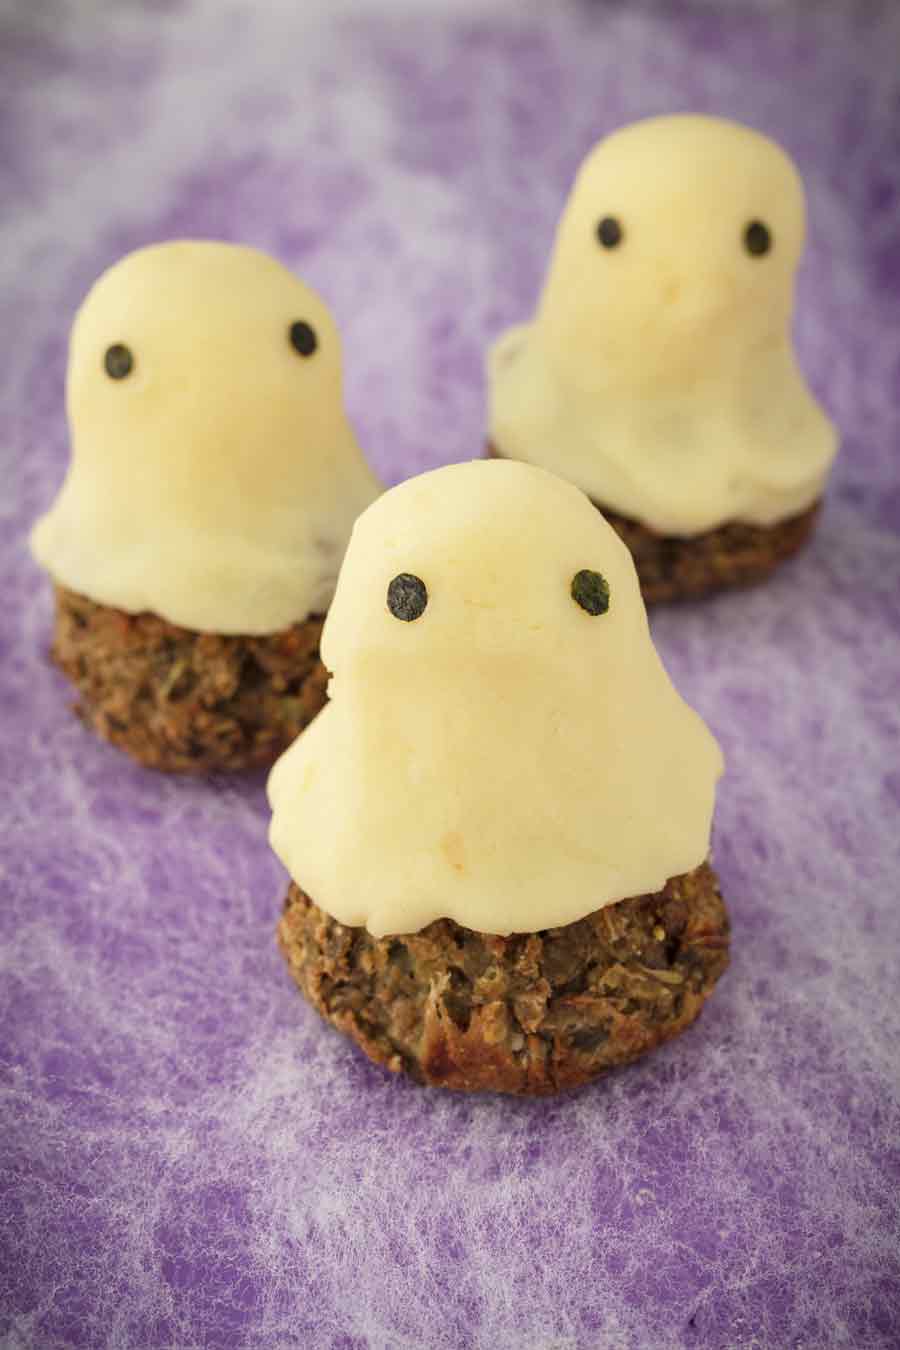 lentil loaf cupcakes with mashed potato ghosts on top